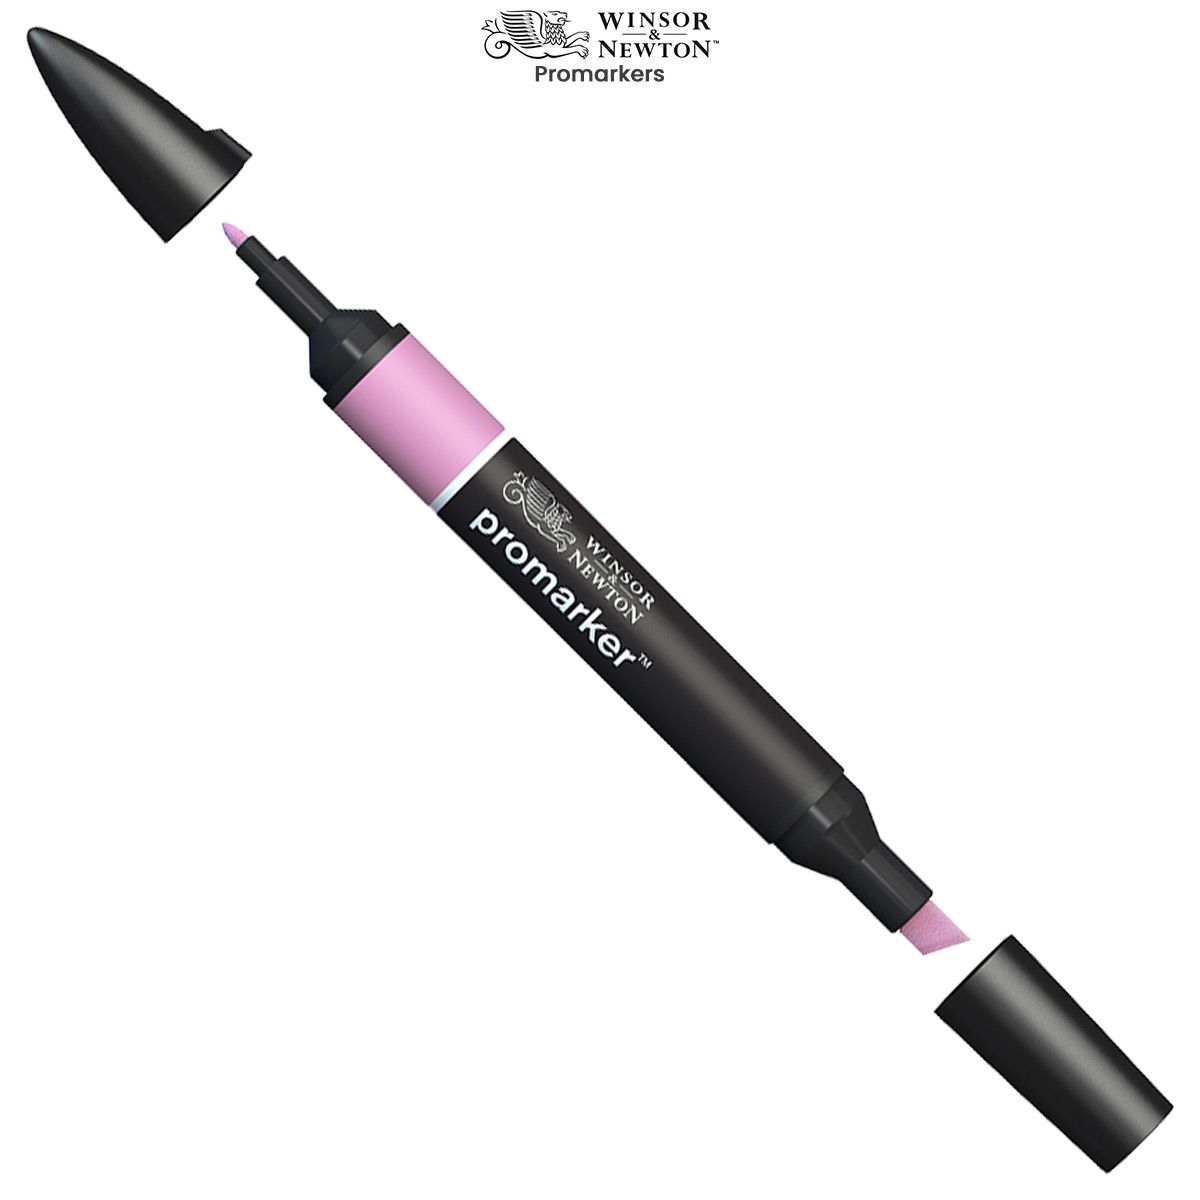 Winsor & Newton Promarker (Brush) review - My go to markers